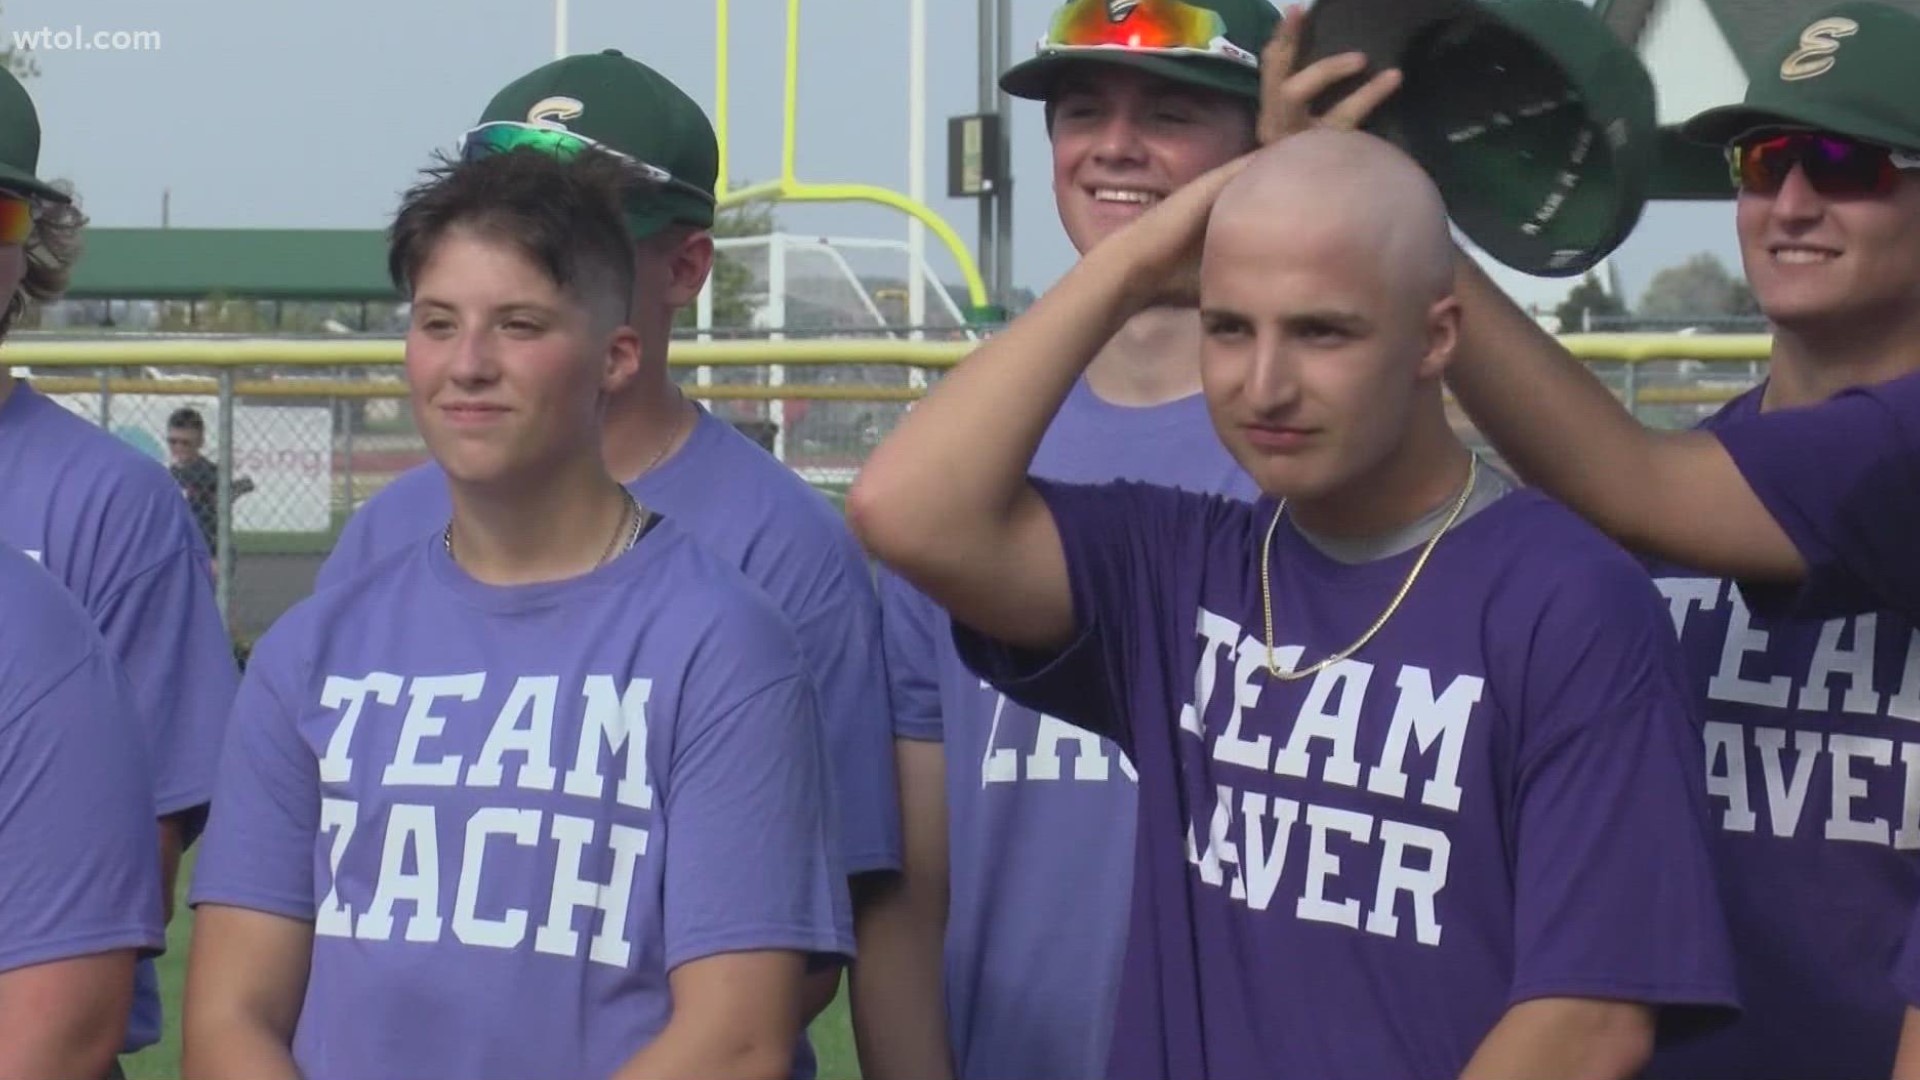 The Vikings' second baseman, senior Zach Laver, was diagnosed with Hodgkin lymphoma in August.